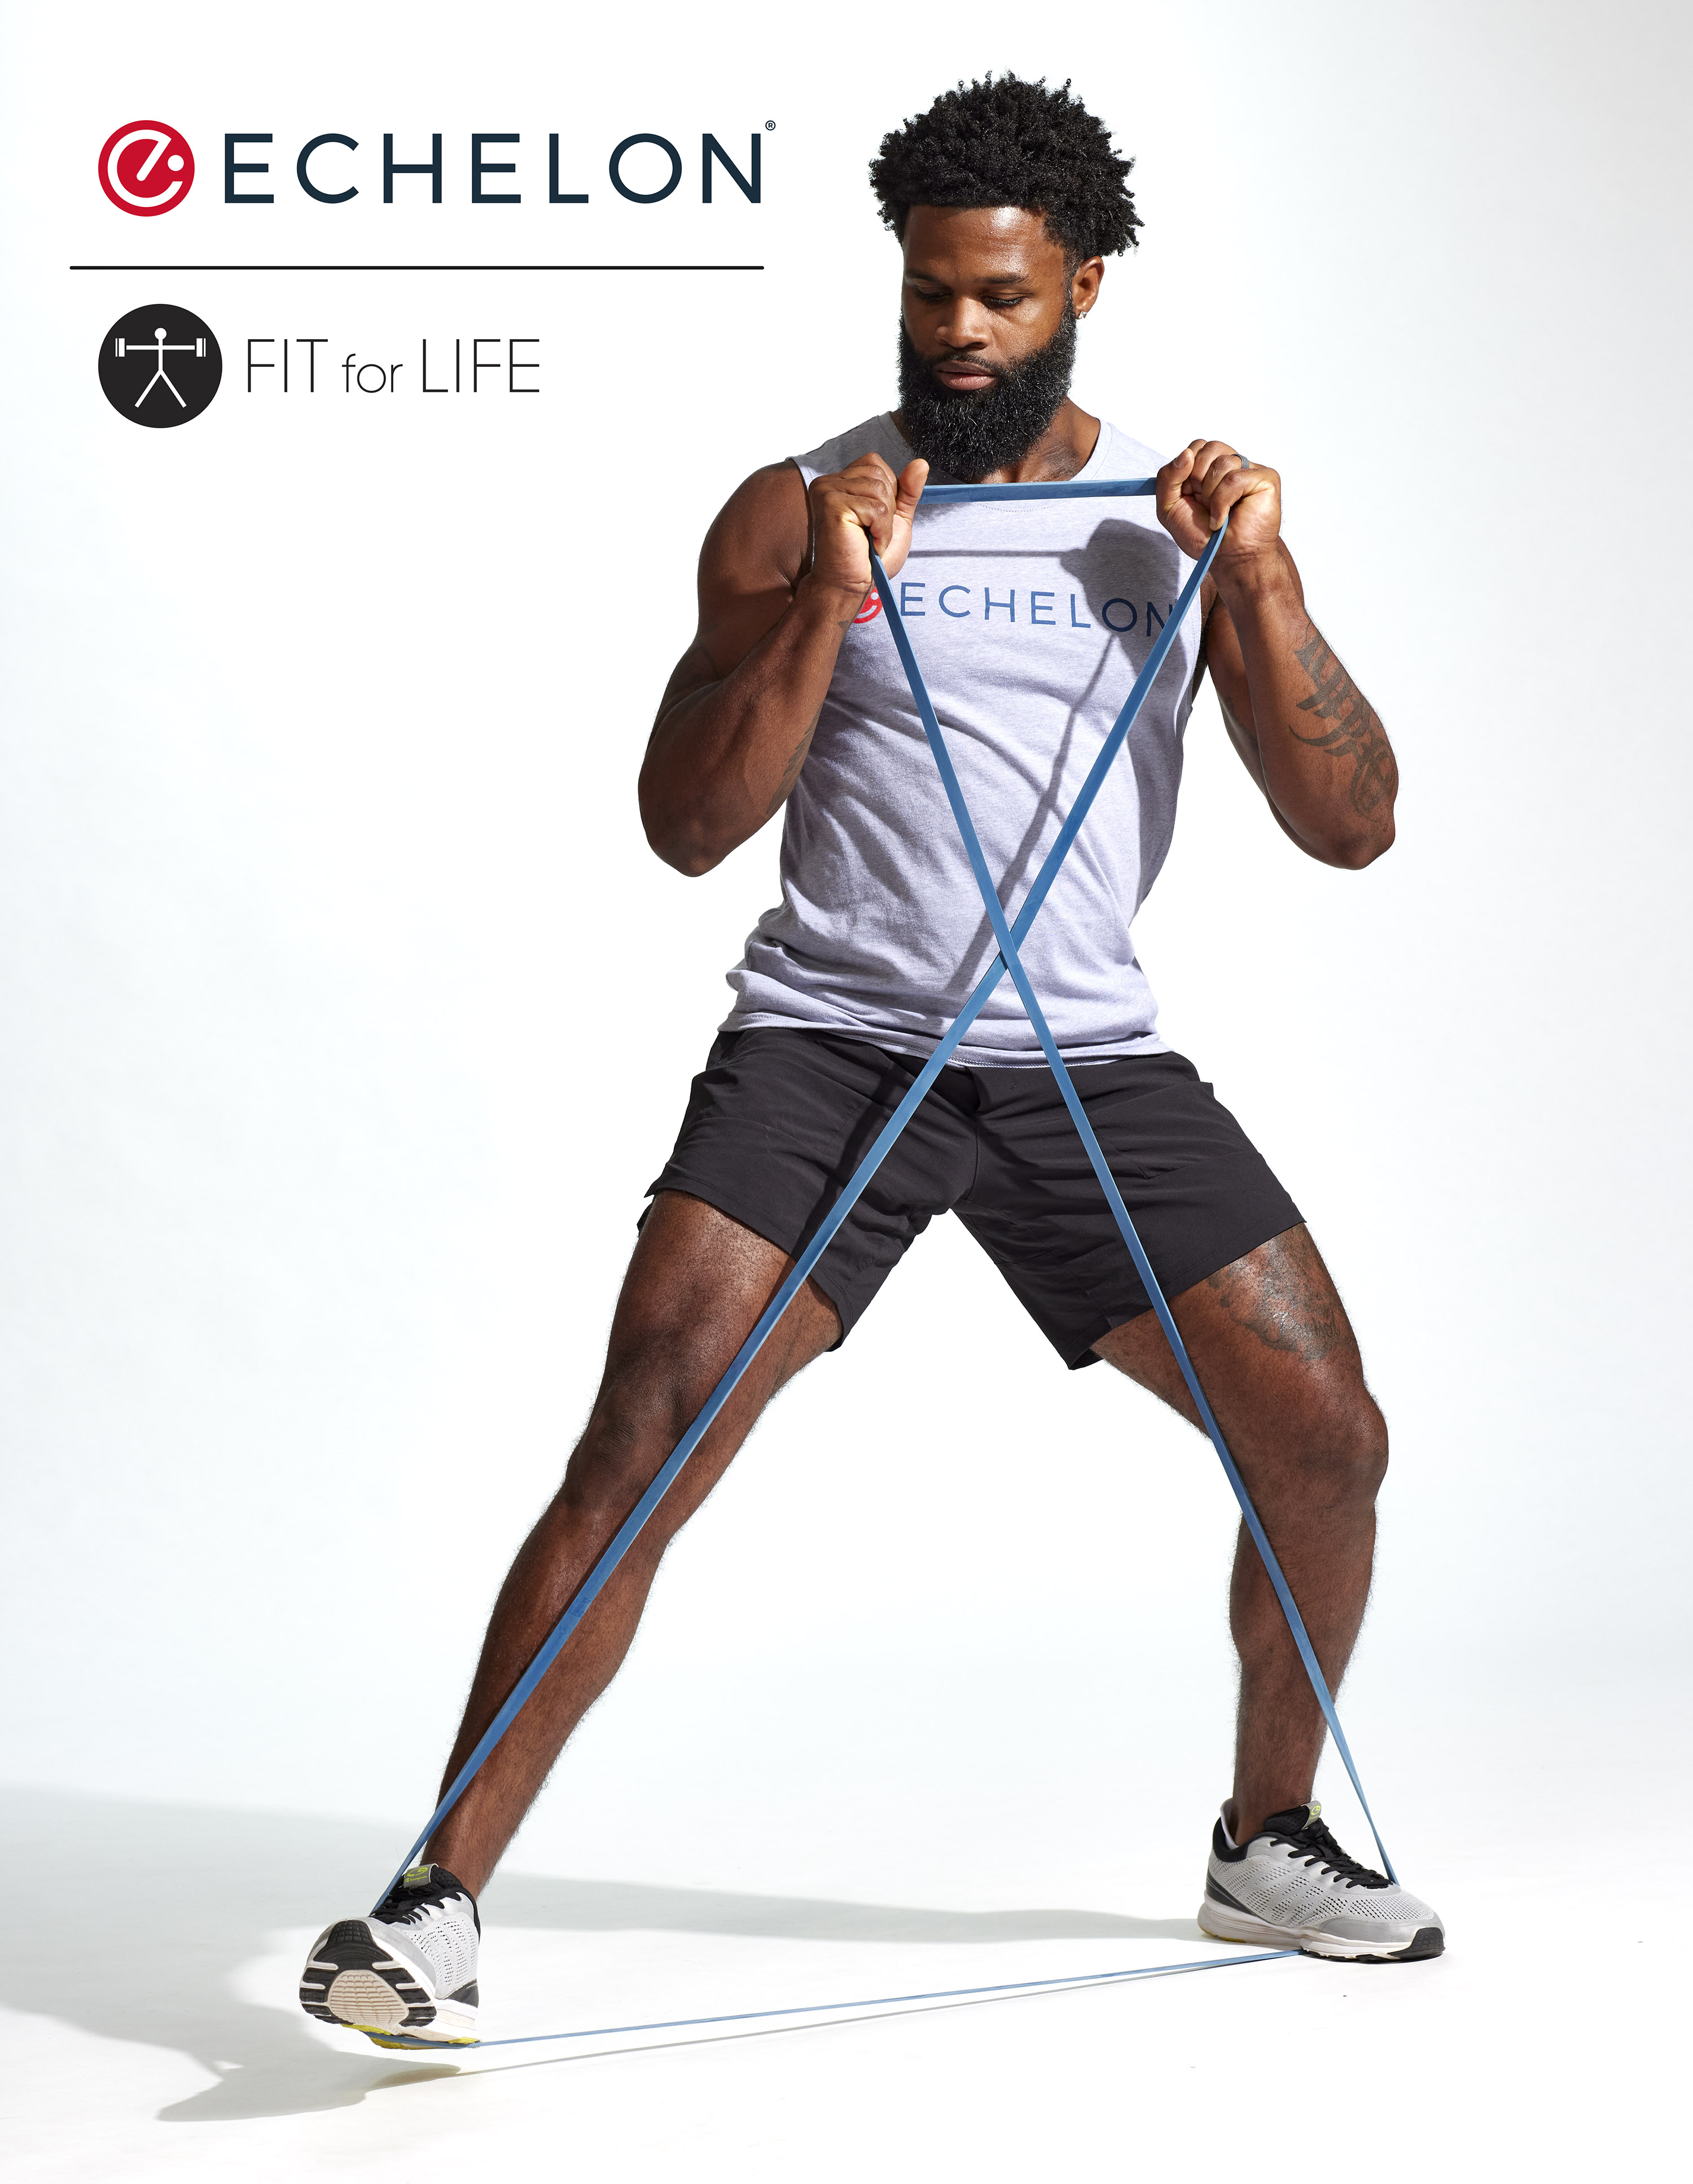 Man in Echelon shirt exercising with resistance bands showing Fit for Life and Echelon logo.